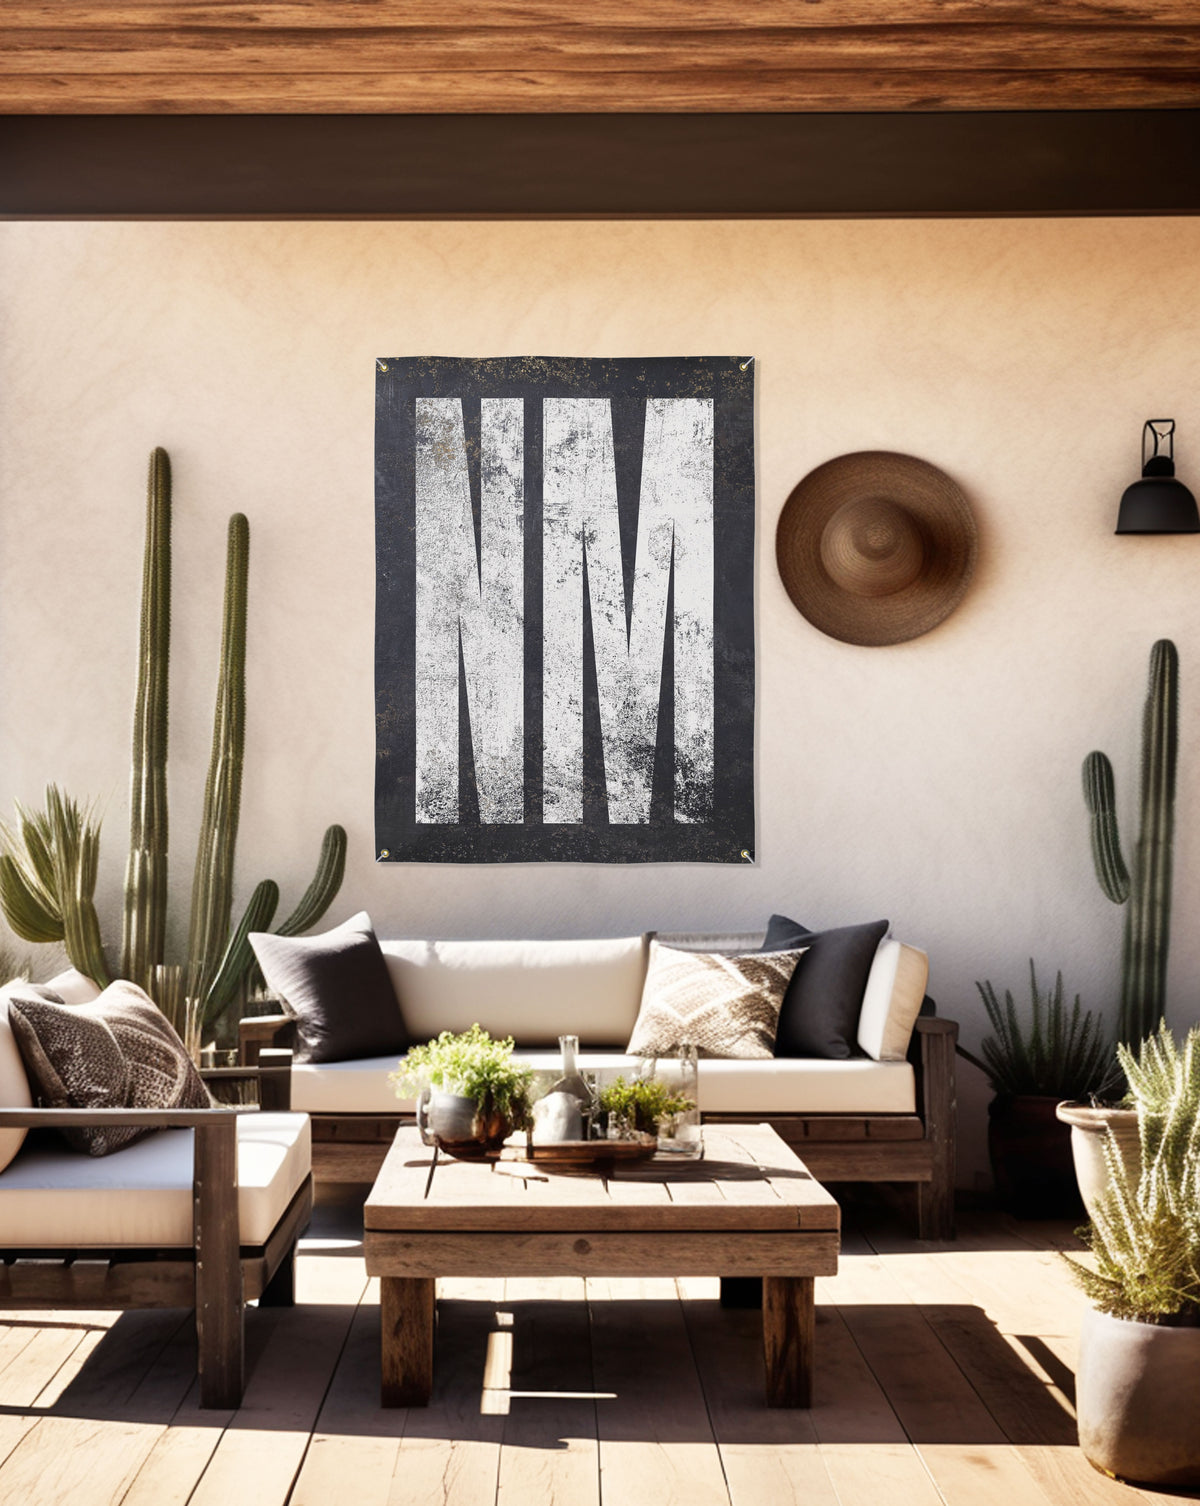 New Mexico Essence: Vibrant Indoor Outdoor Vinyl Banner for Home Decor